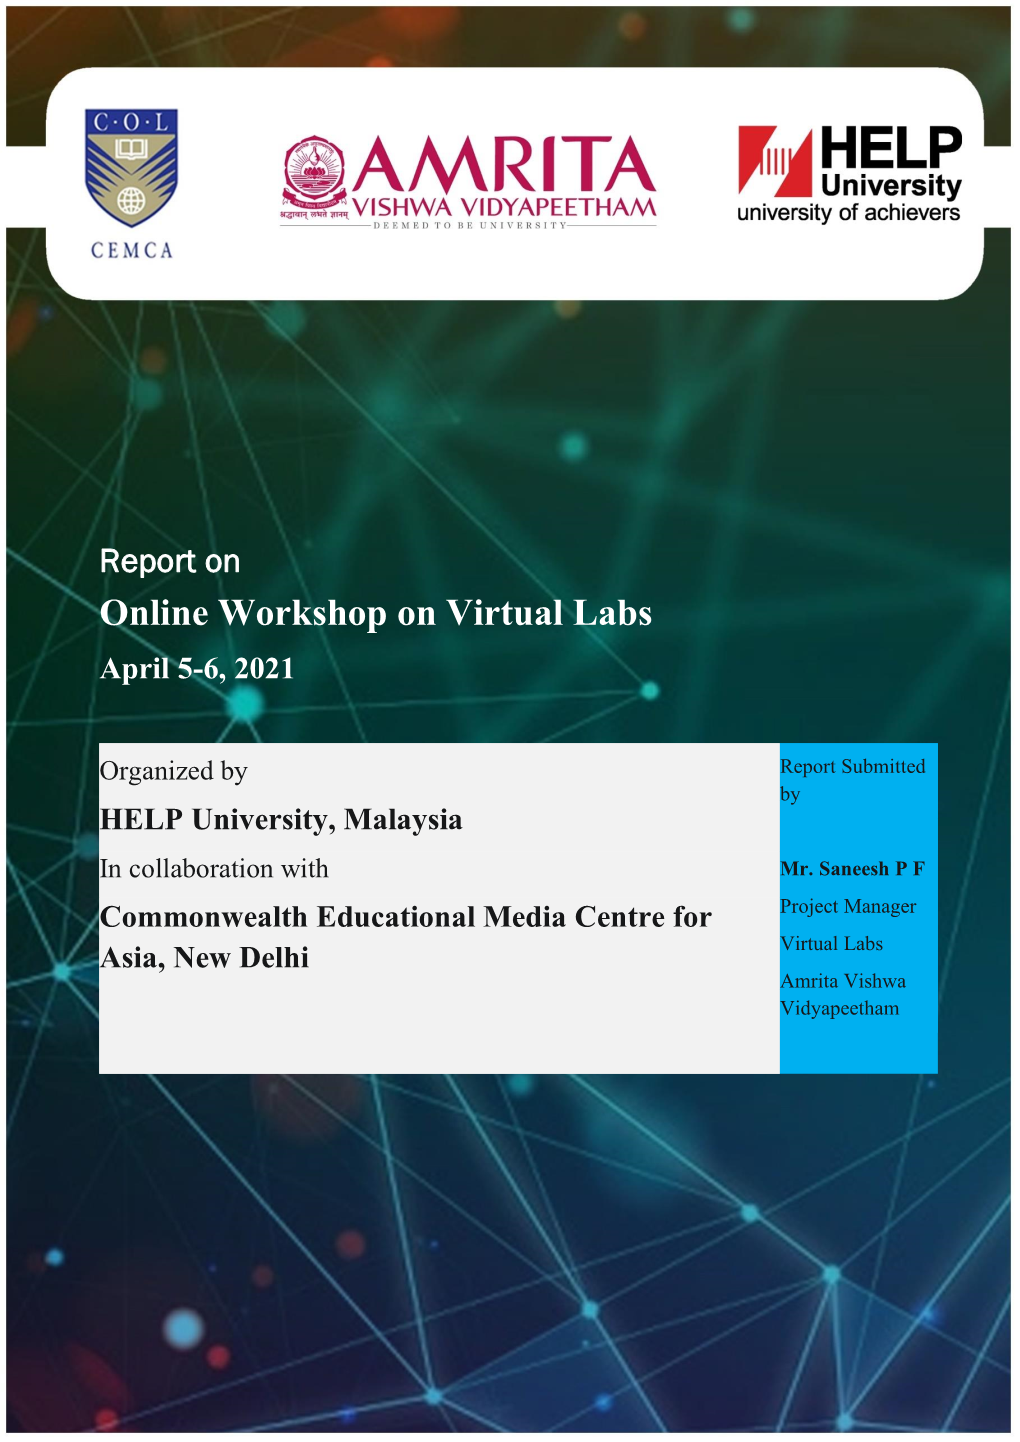 Online Workshop on Virtual Labs for Faculty of HELP University, Malaysia